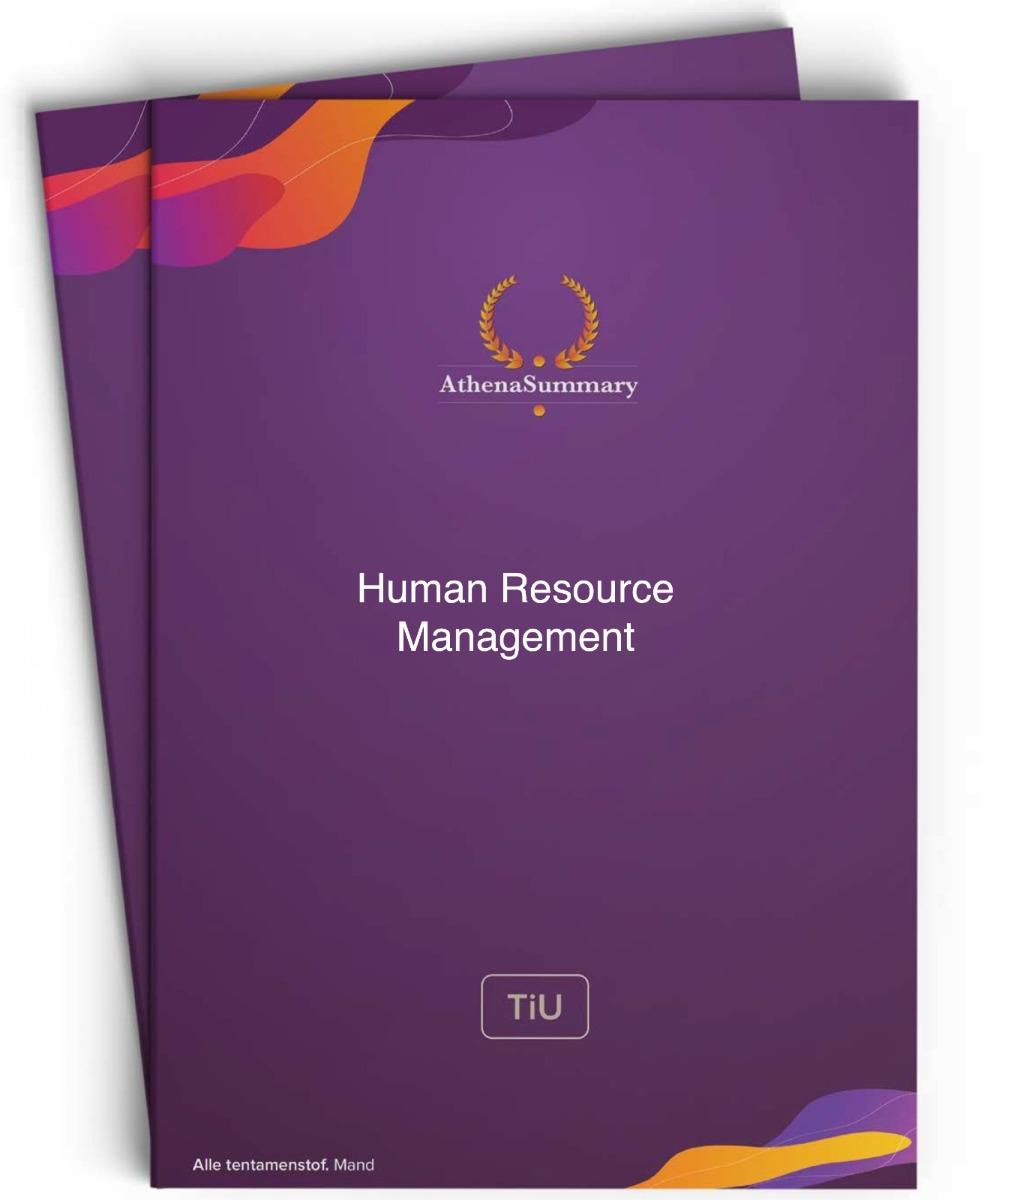 Literature and Lecture Summary: Human Resource Management